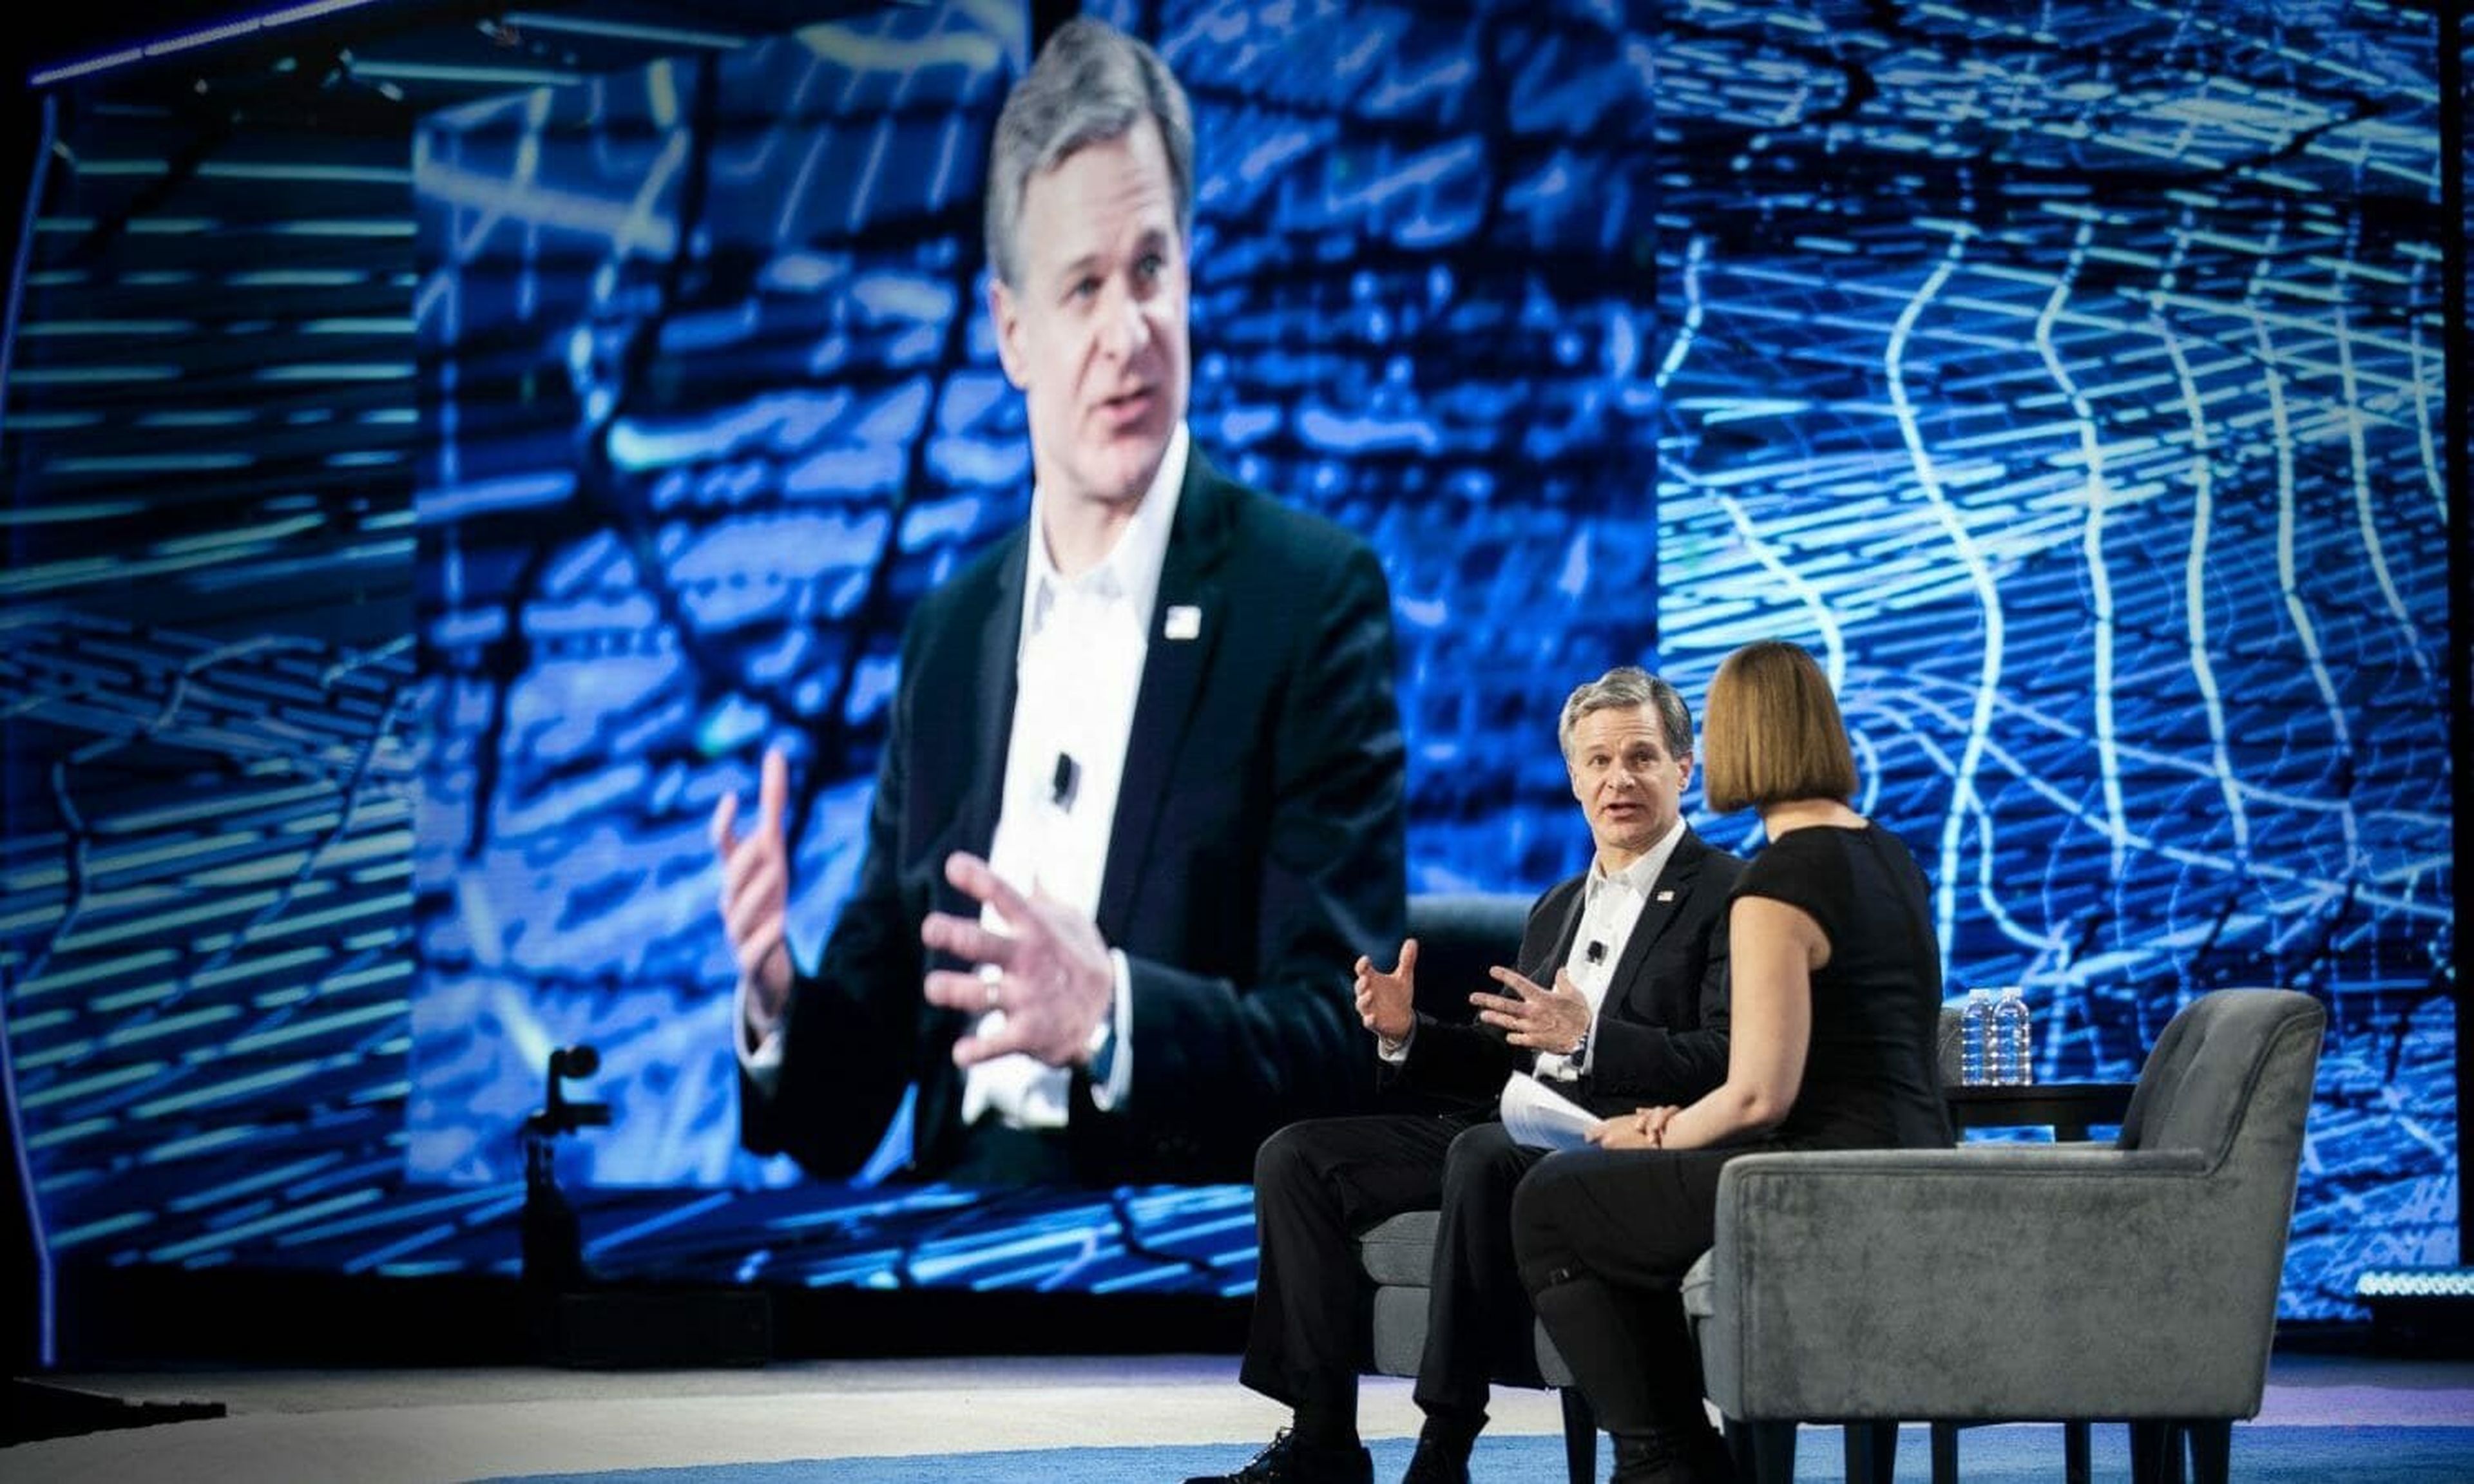 FBI Director Christopher Wray participates in a discussion with Brookings Institute security analyst Susan Hennessey during the RSA Conference on March 5, 2019, in San Francisco, California. As recently as January, the FBI has warned the private sector of the so-called Maze ransomware group. (FBI)